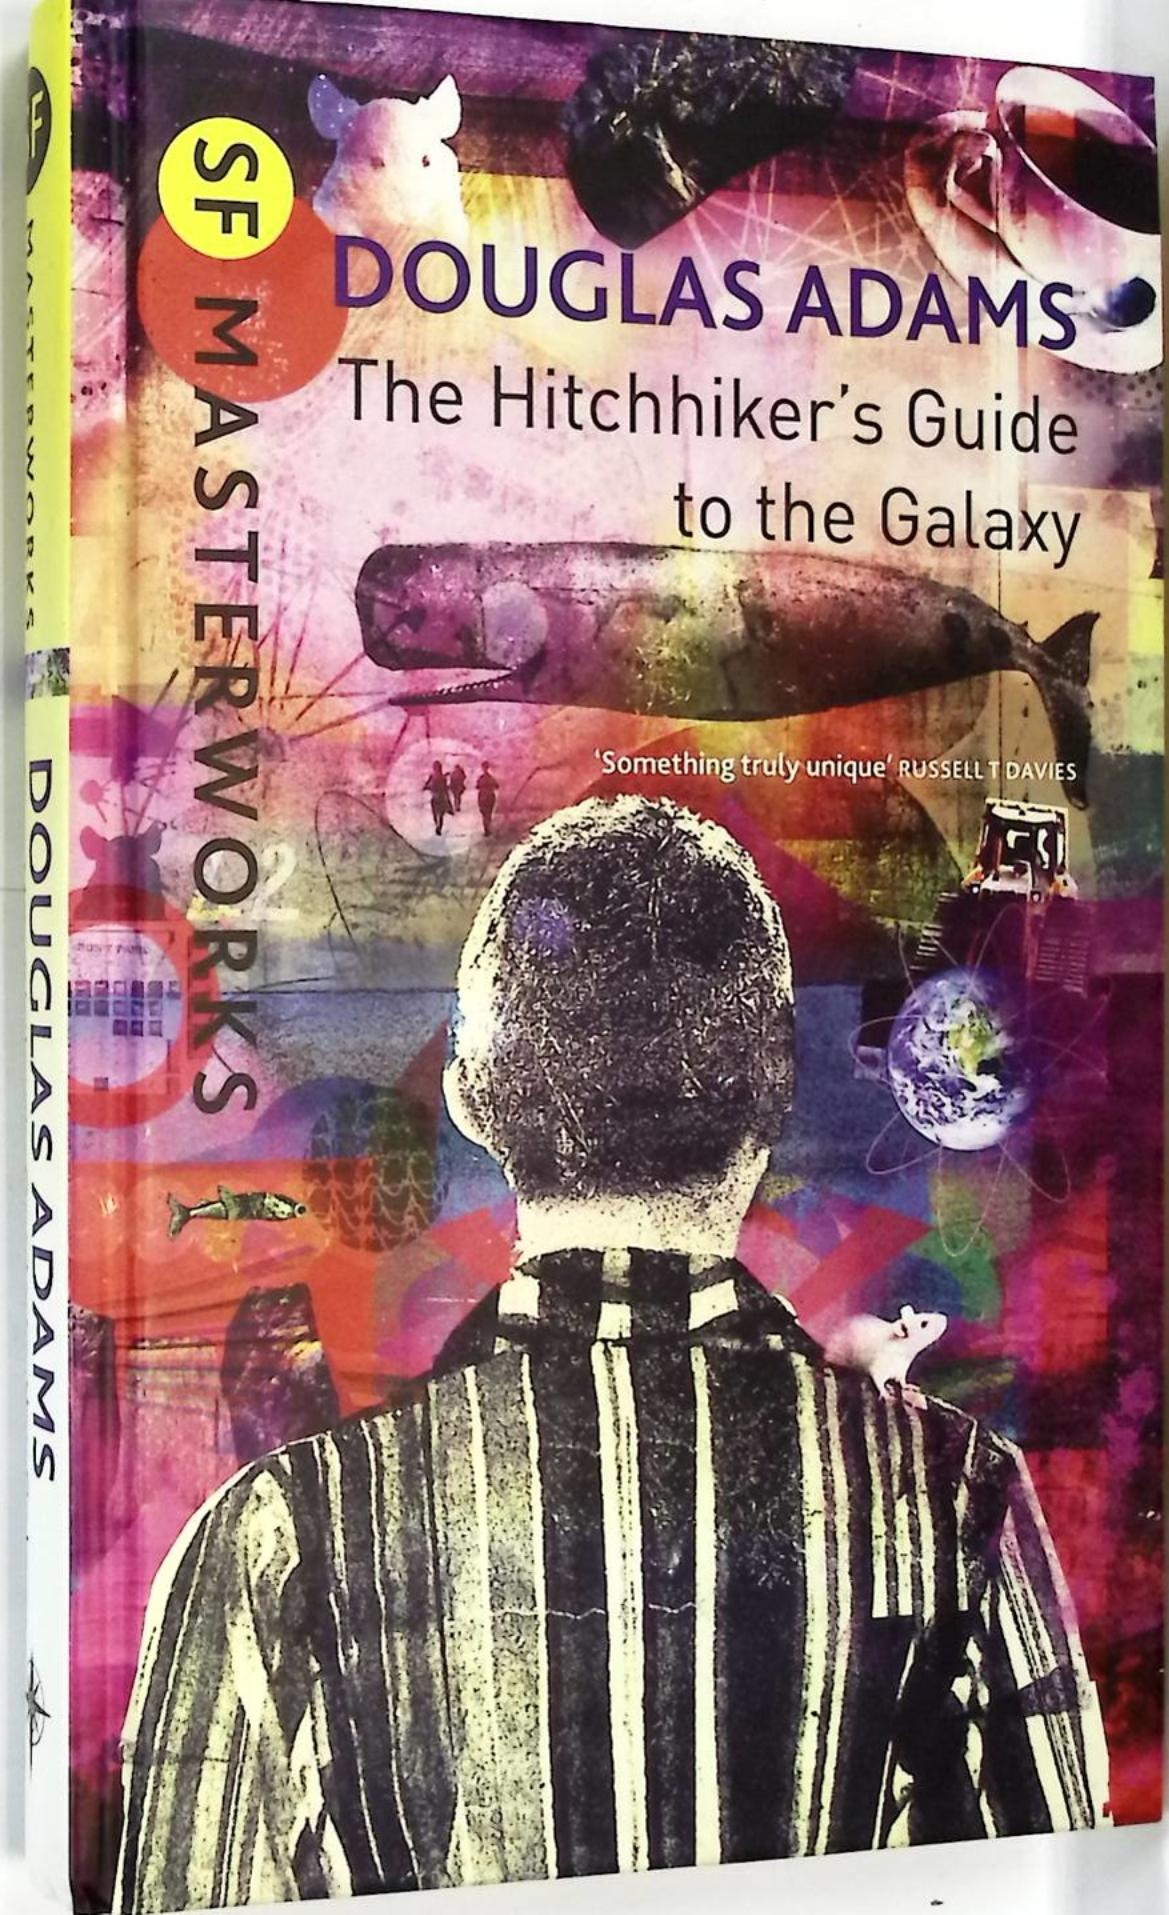 The Hitchhiker's Guide to the Galaxy. SF Masterworks edition.